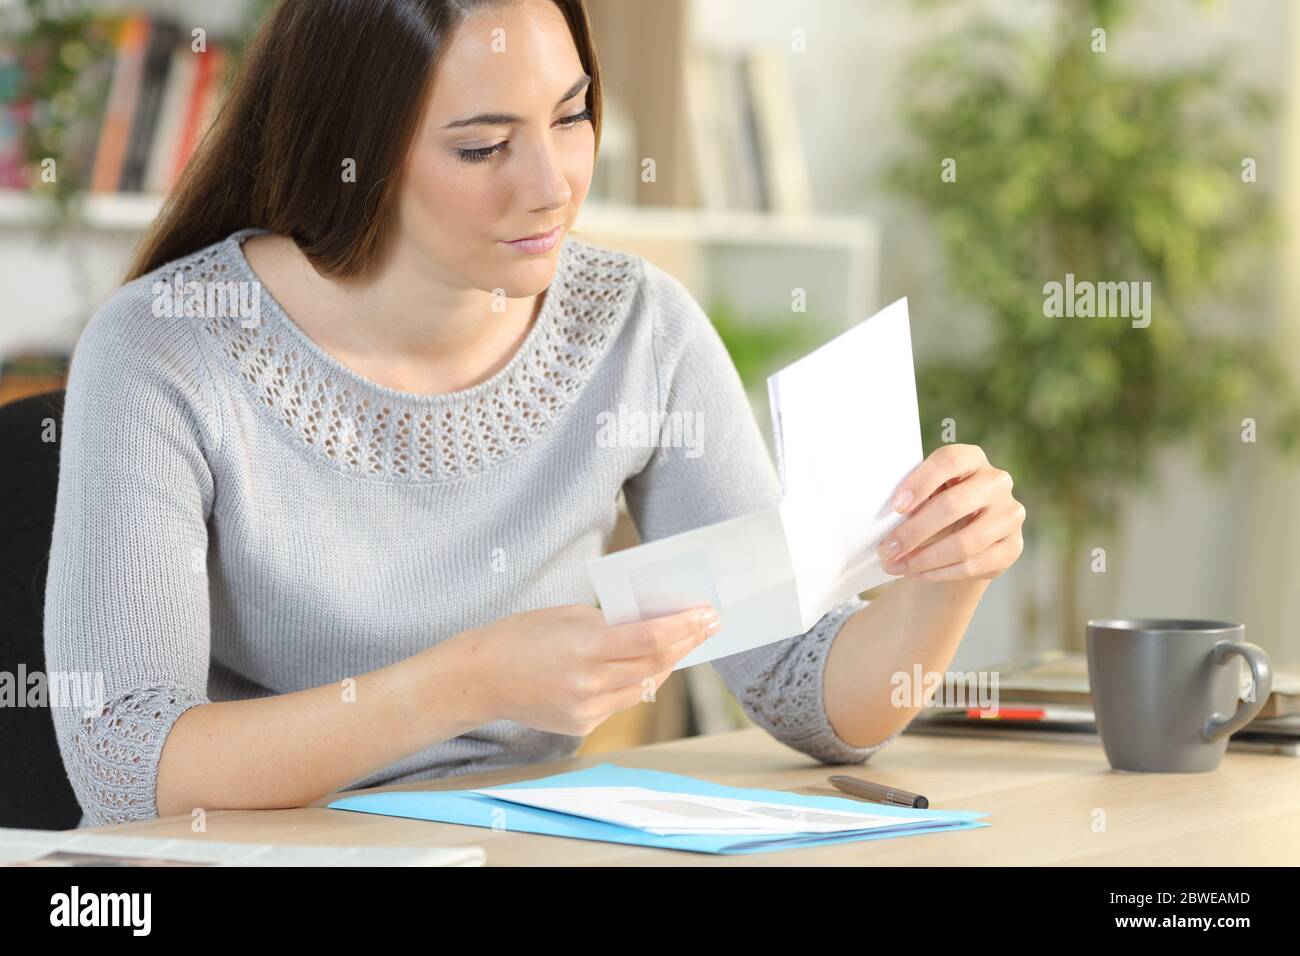 Serious woman opening envelope with letter inside sitting on a desk at home Stock Photo